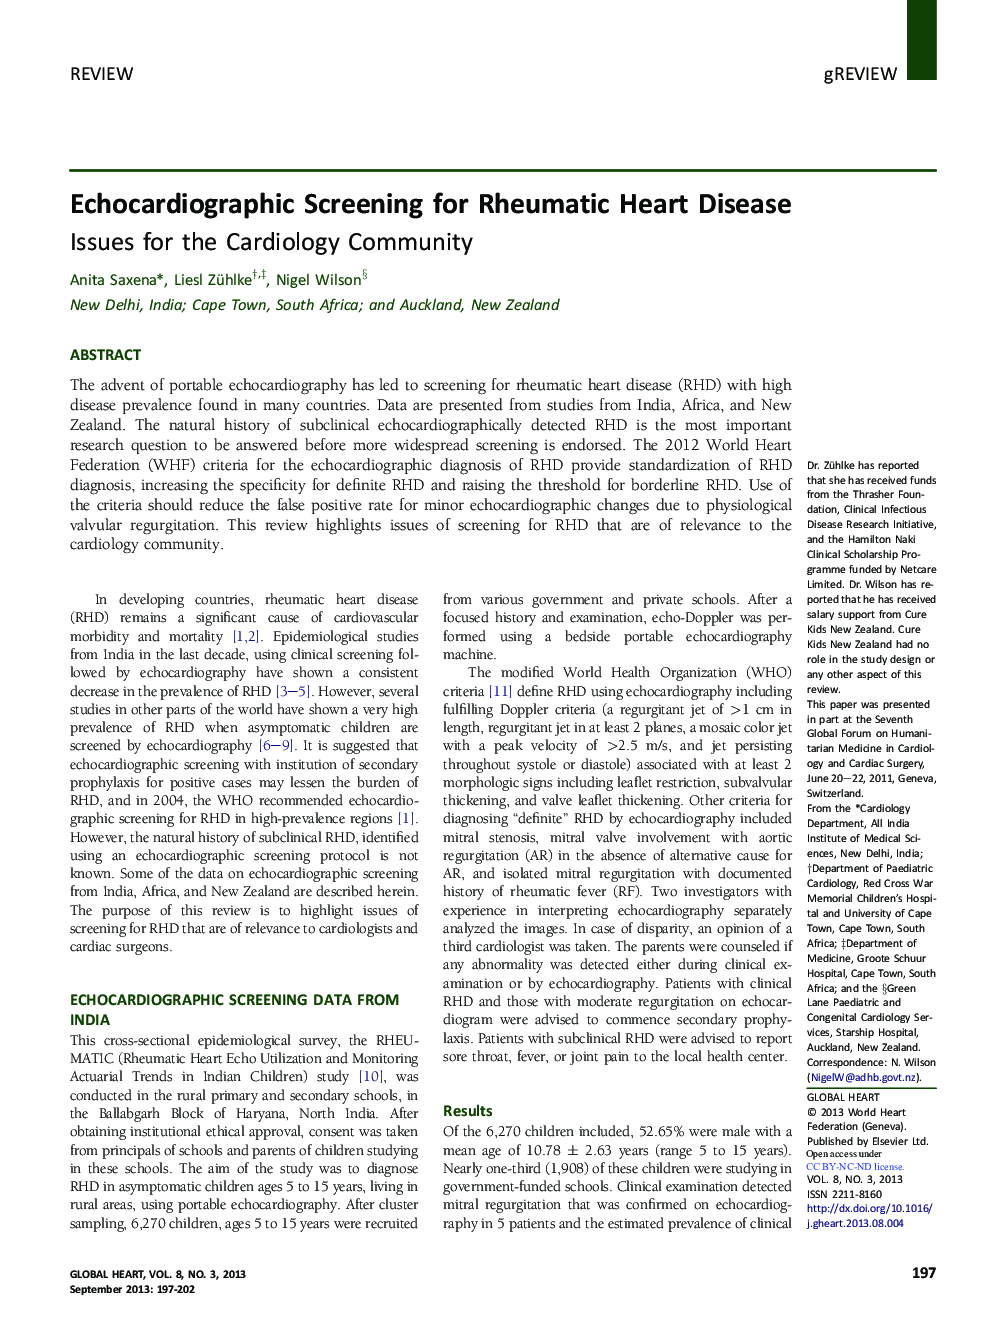 Echocardiographic Screening for Rheumatic Heart Disease: Issues for the Cardiology Community